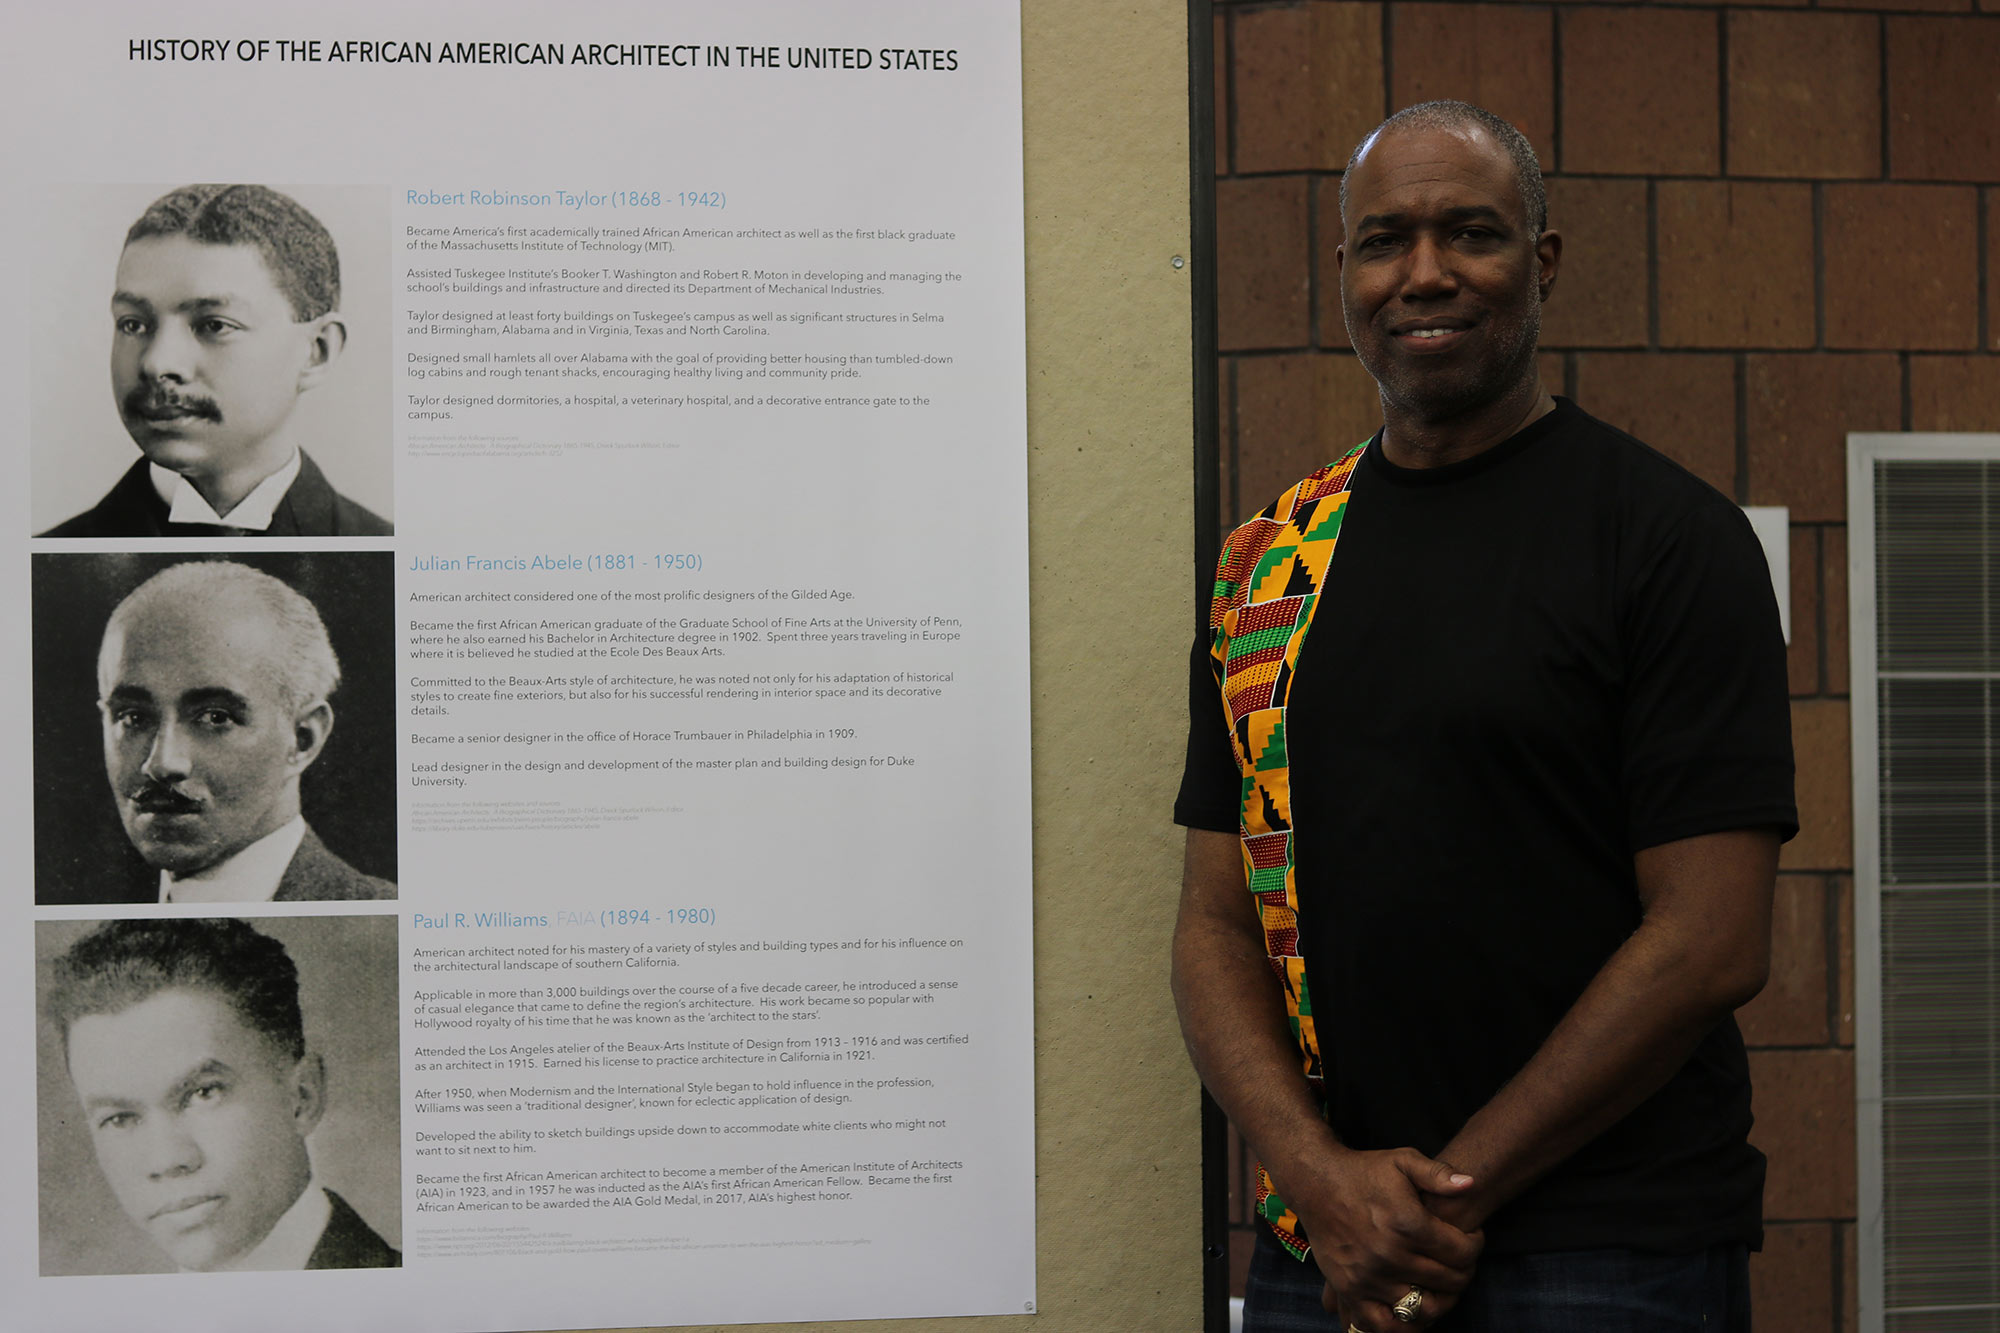 Professor Christopher Hunter poses in front of board in the Charlotte and Richard McNeel Gallery during a reception for &quot;The Work of Philip Freelon&quot; exhibit 